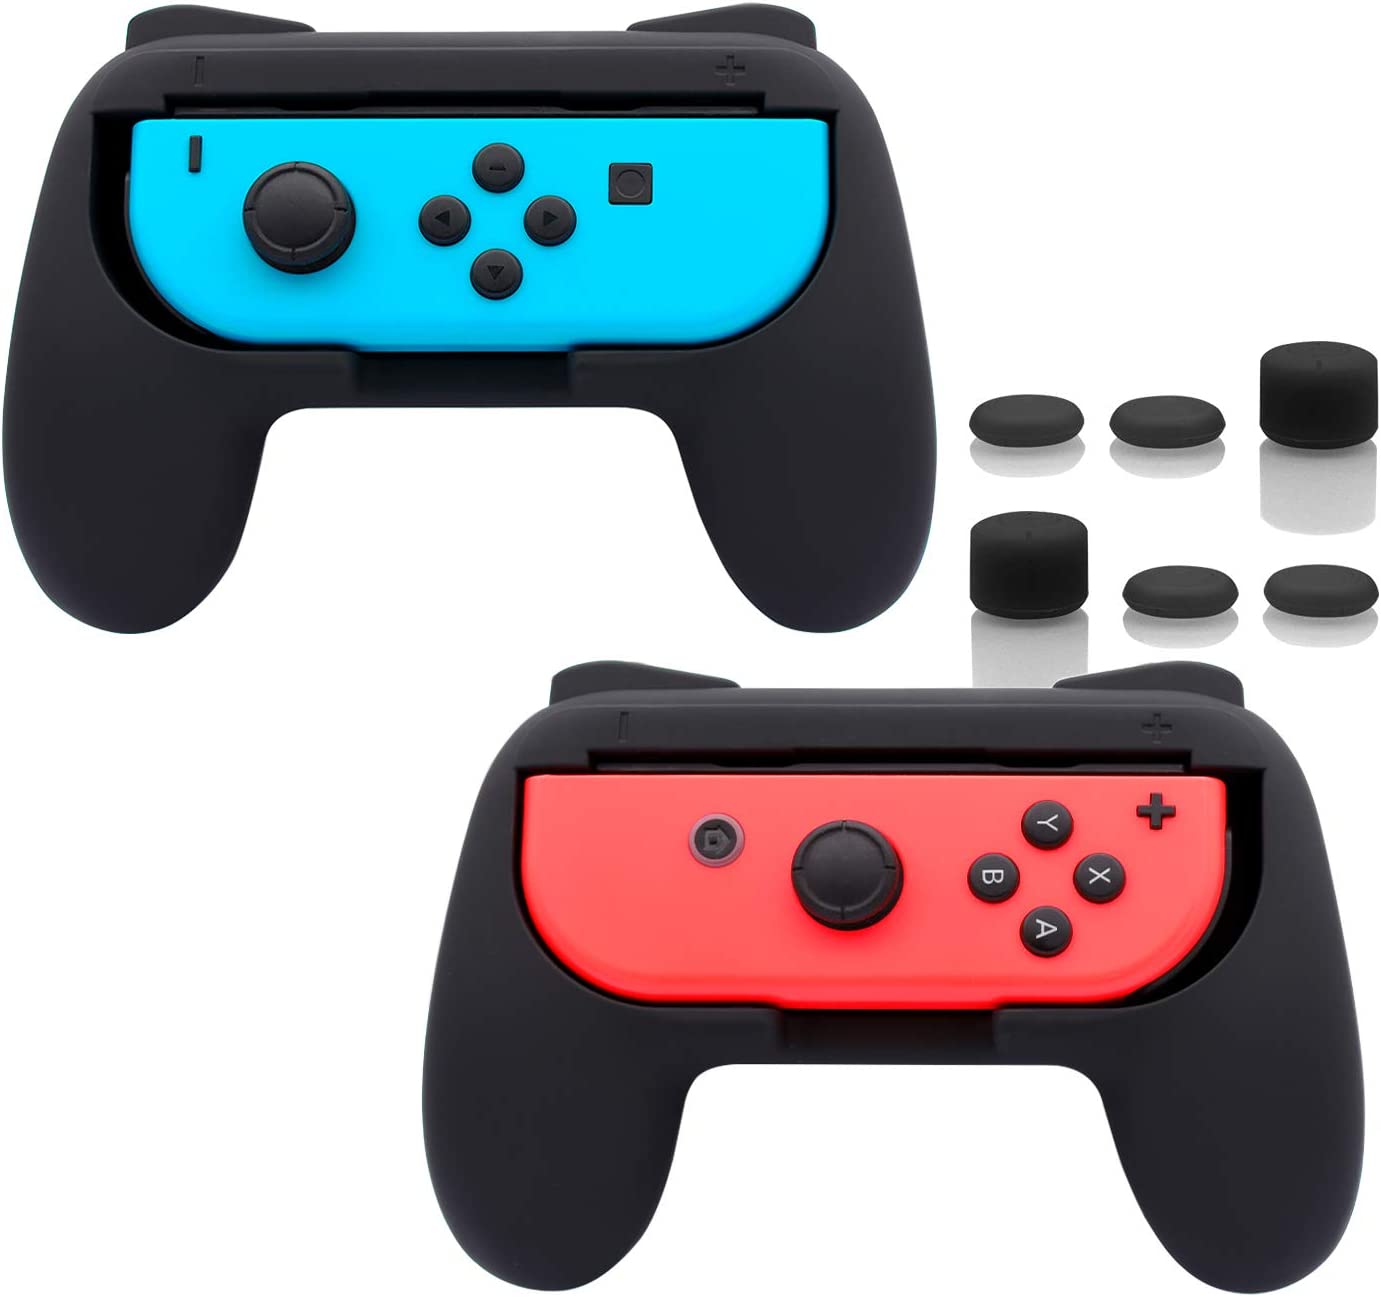 Grips for Nintendo Switch Joy-Cons.